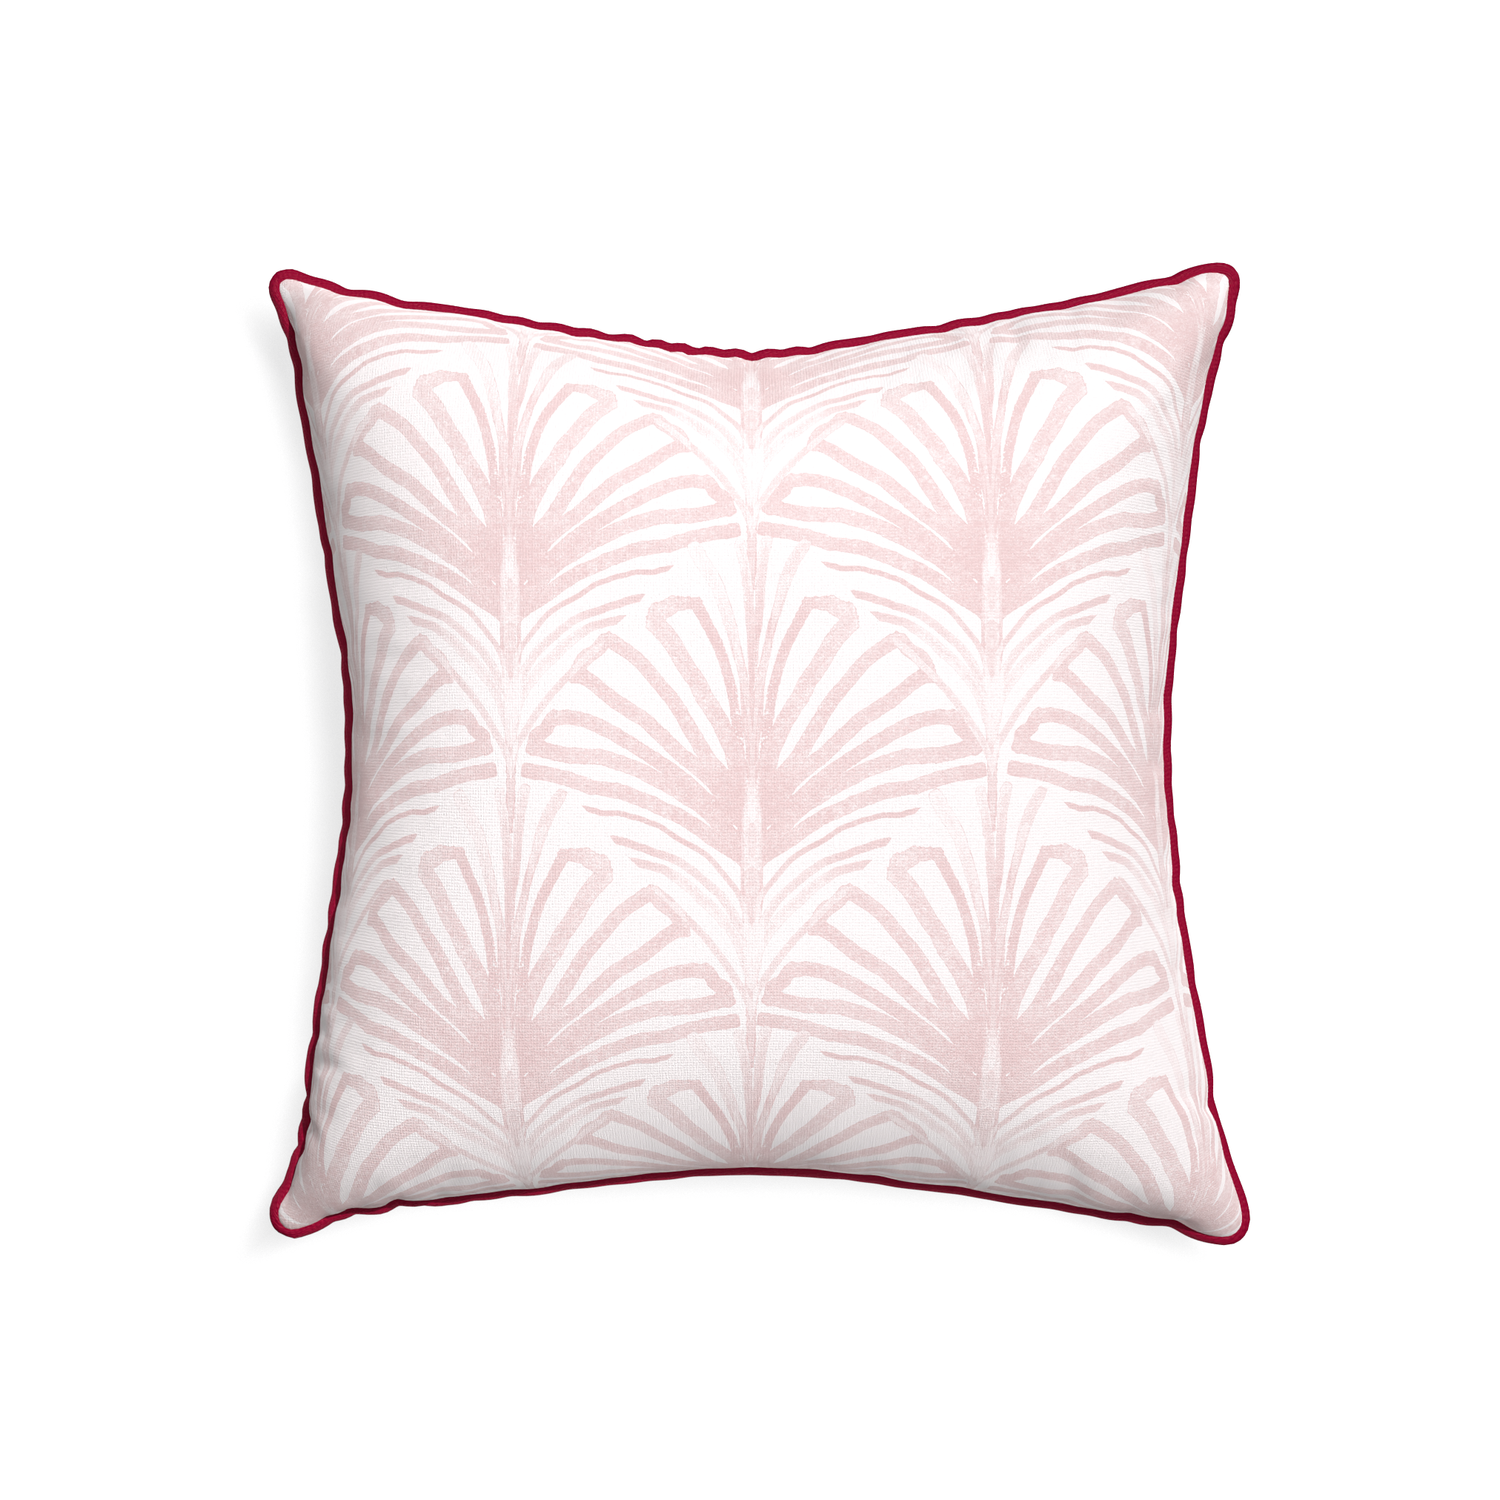 22-square suzy rose custom pillow with raspberry piping on white background